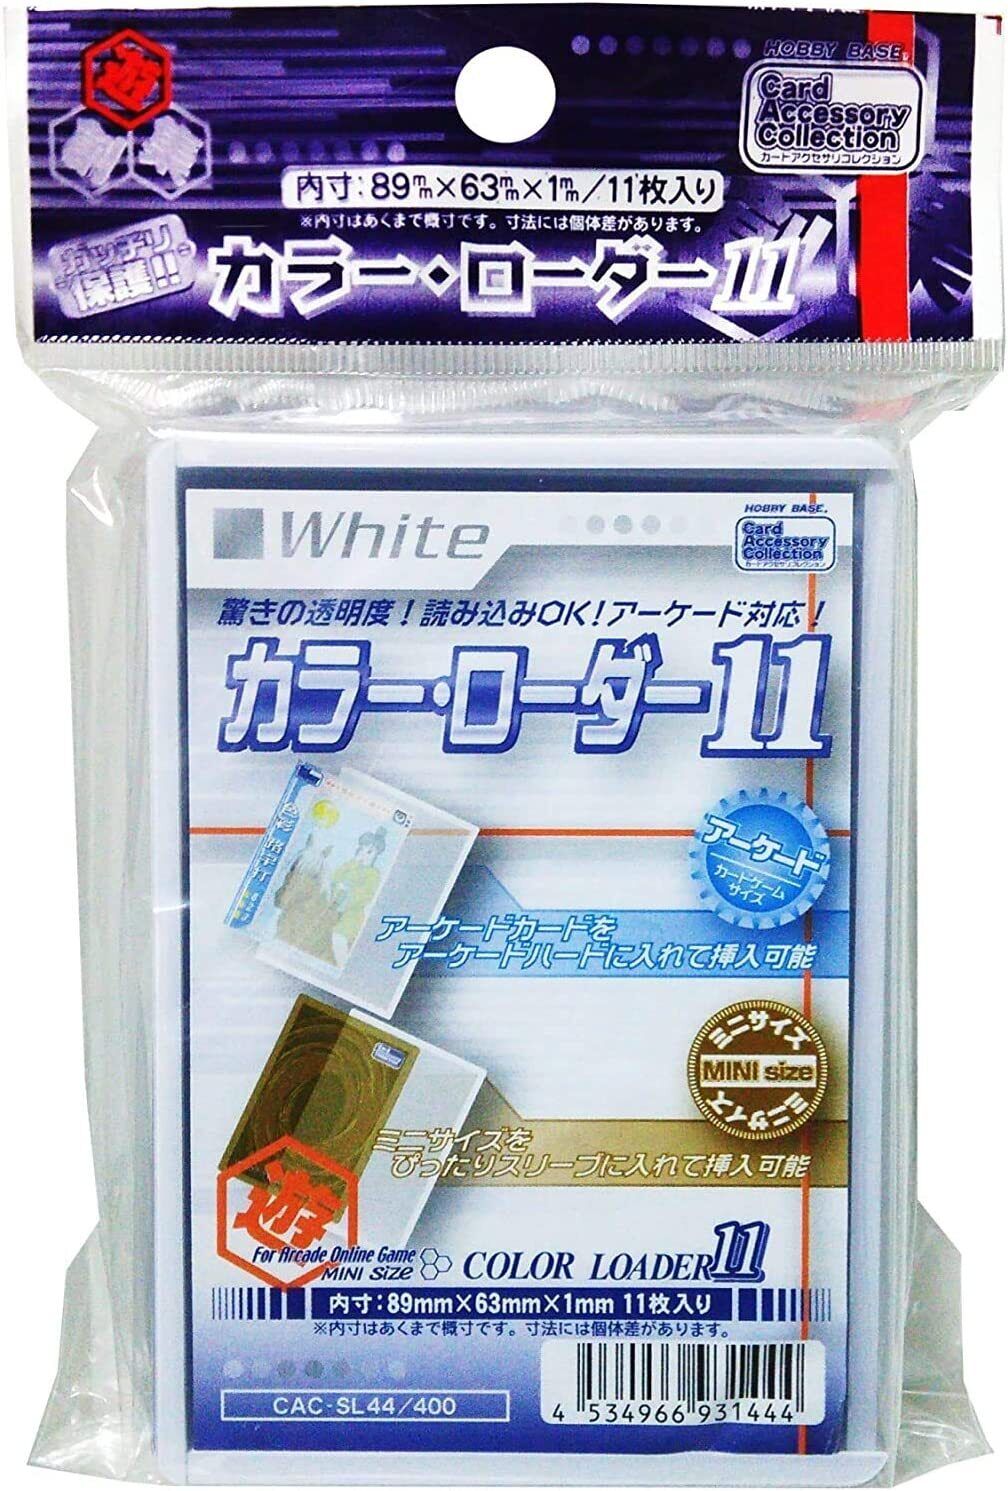 Hobby Base Card Accessory Color Lord 11 White CAC-SL44